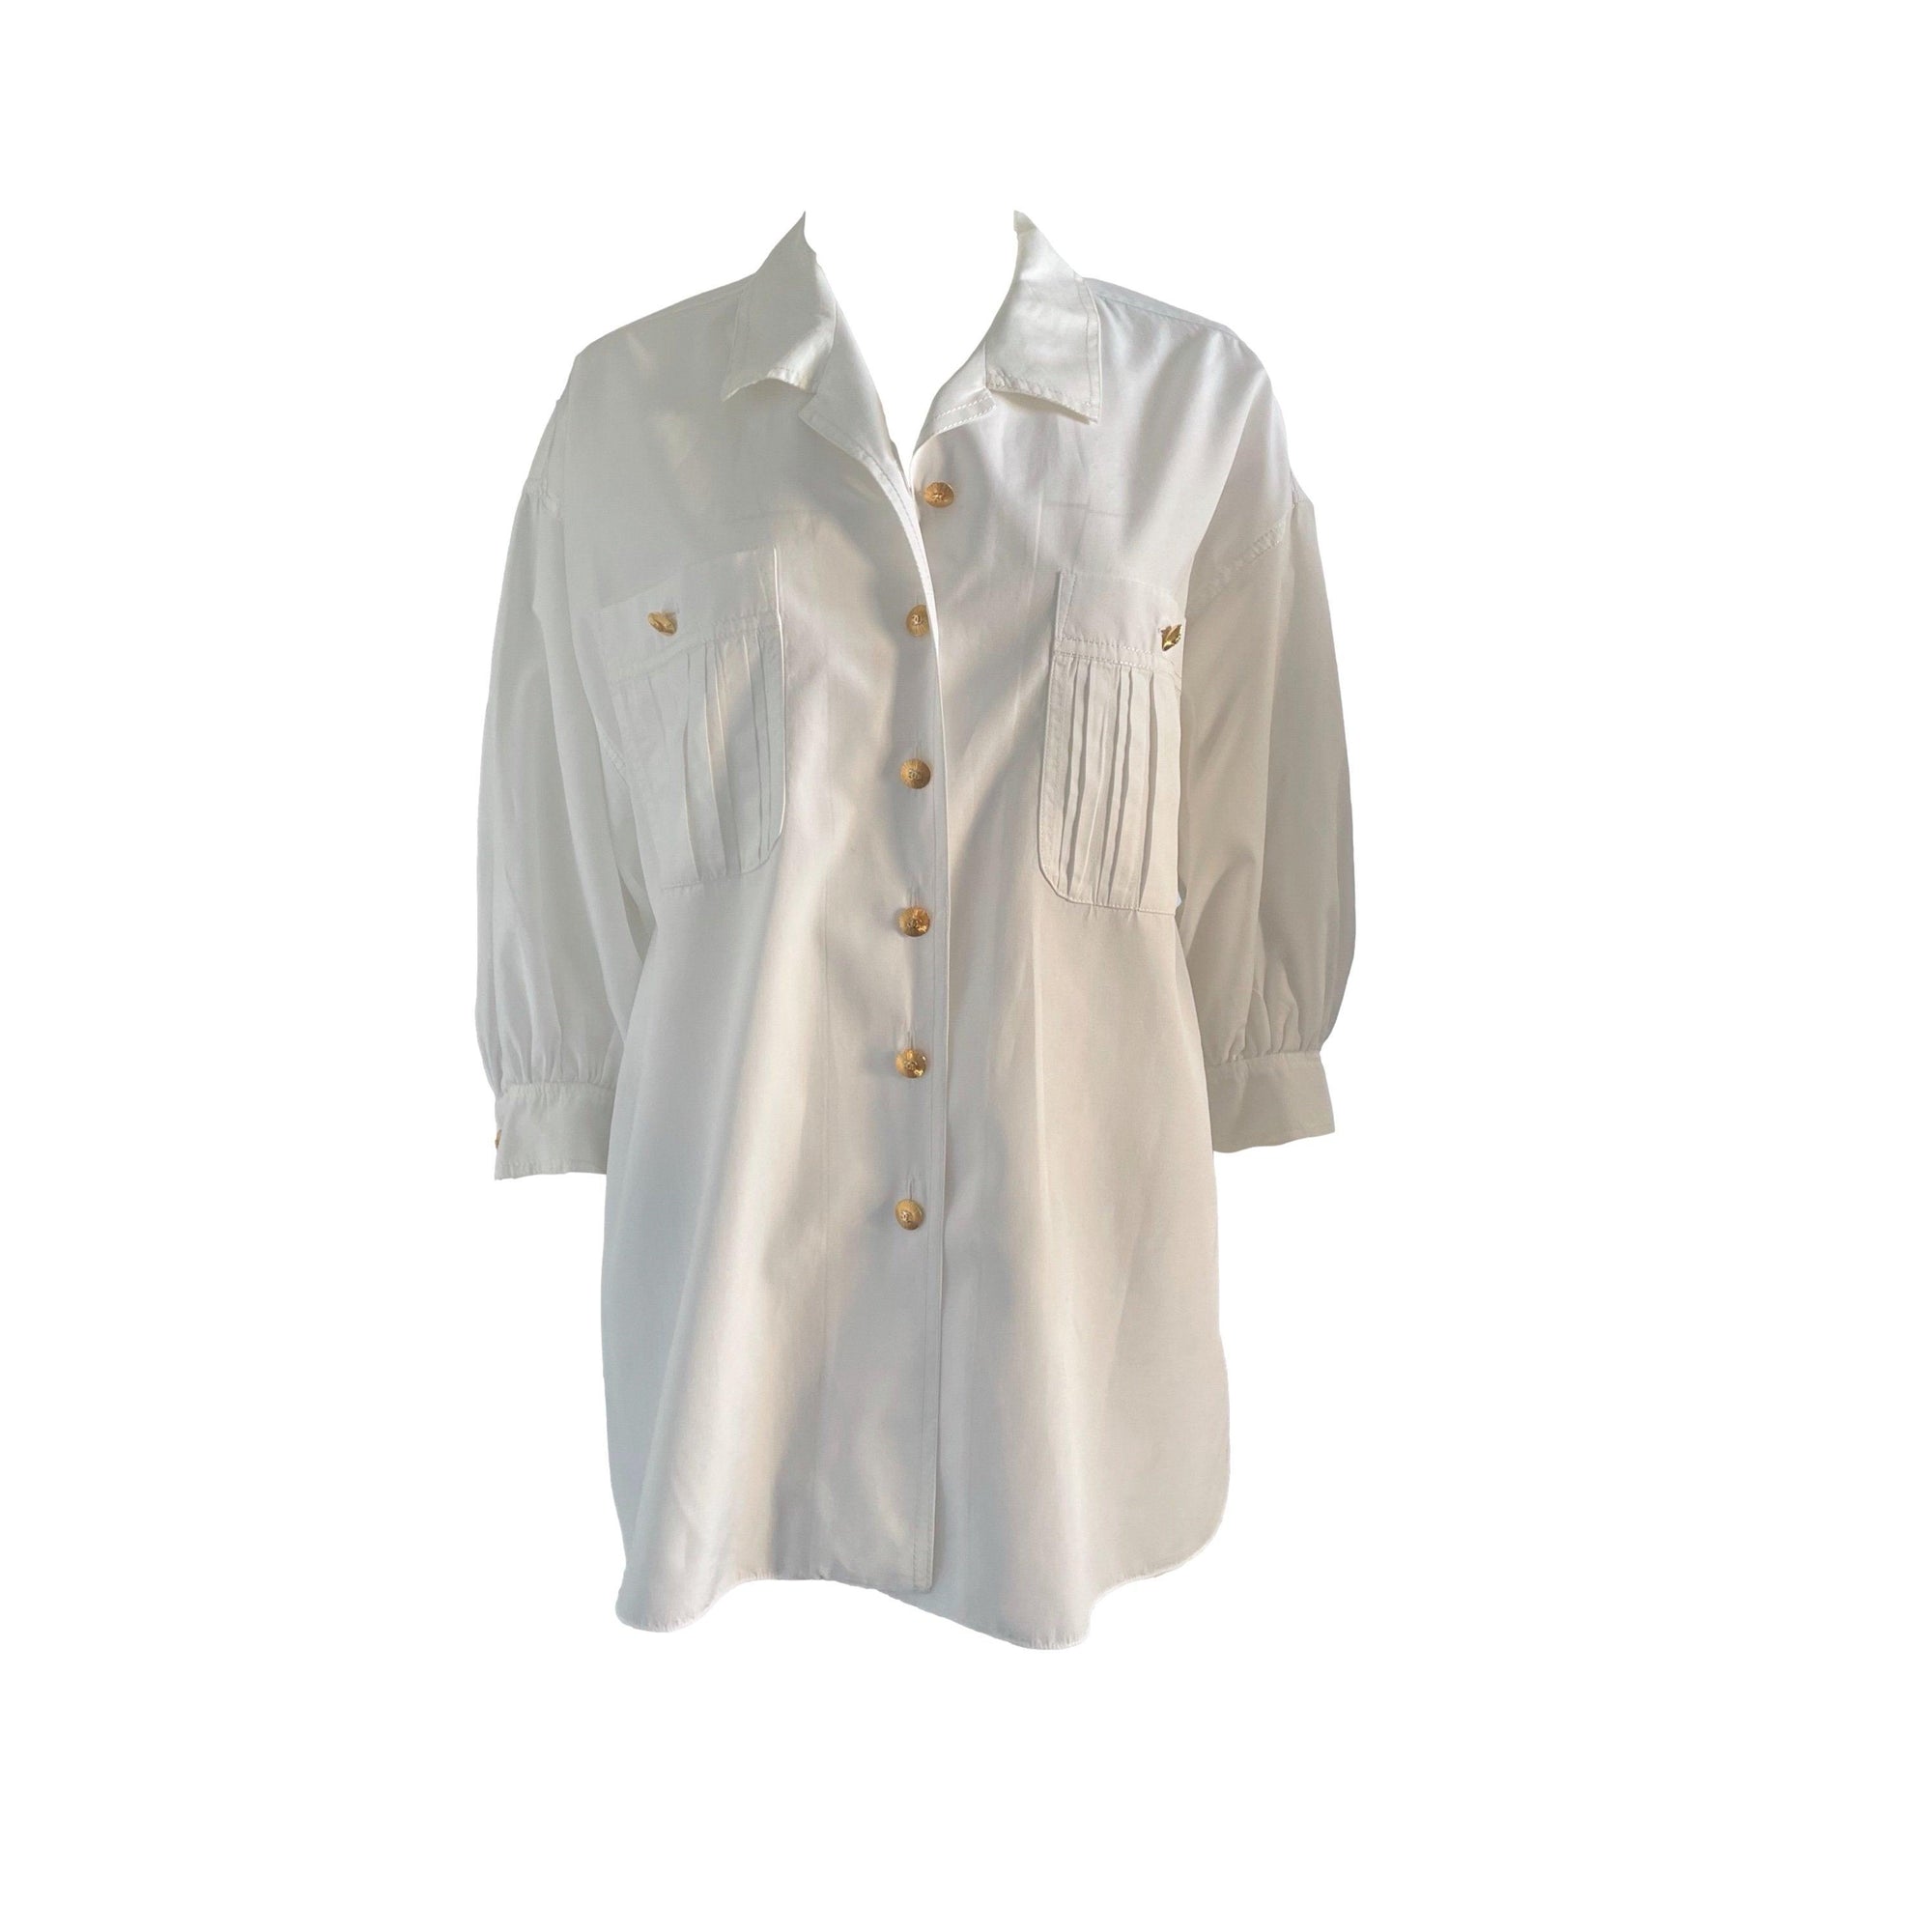 Chanel White Oversized Button Down - Apparel